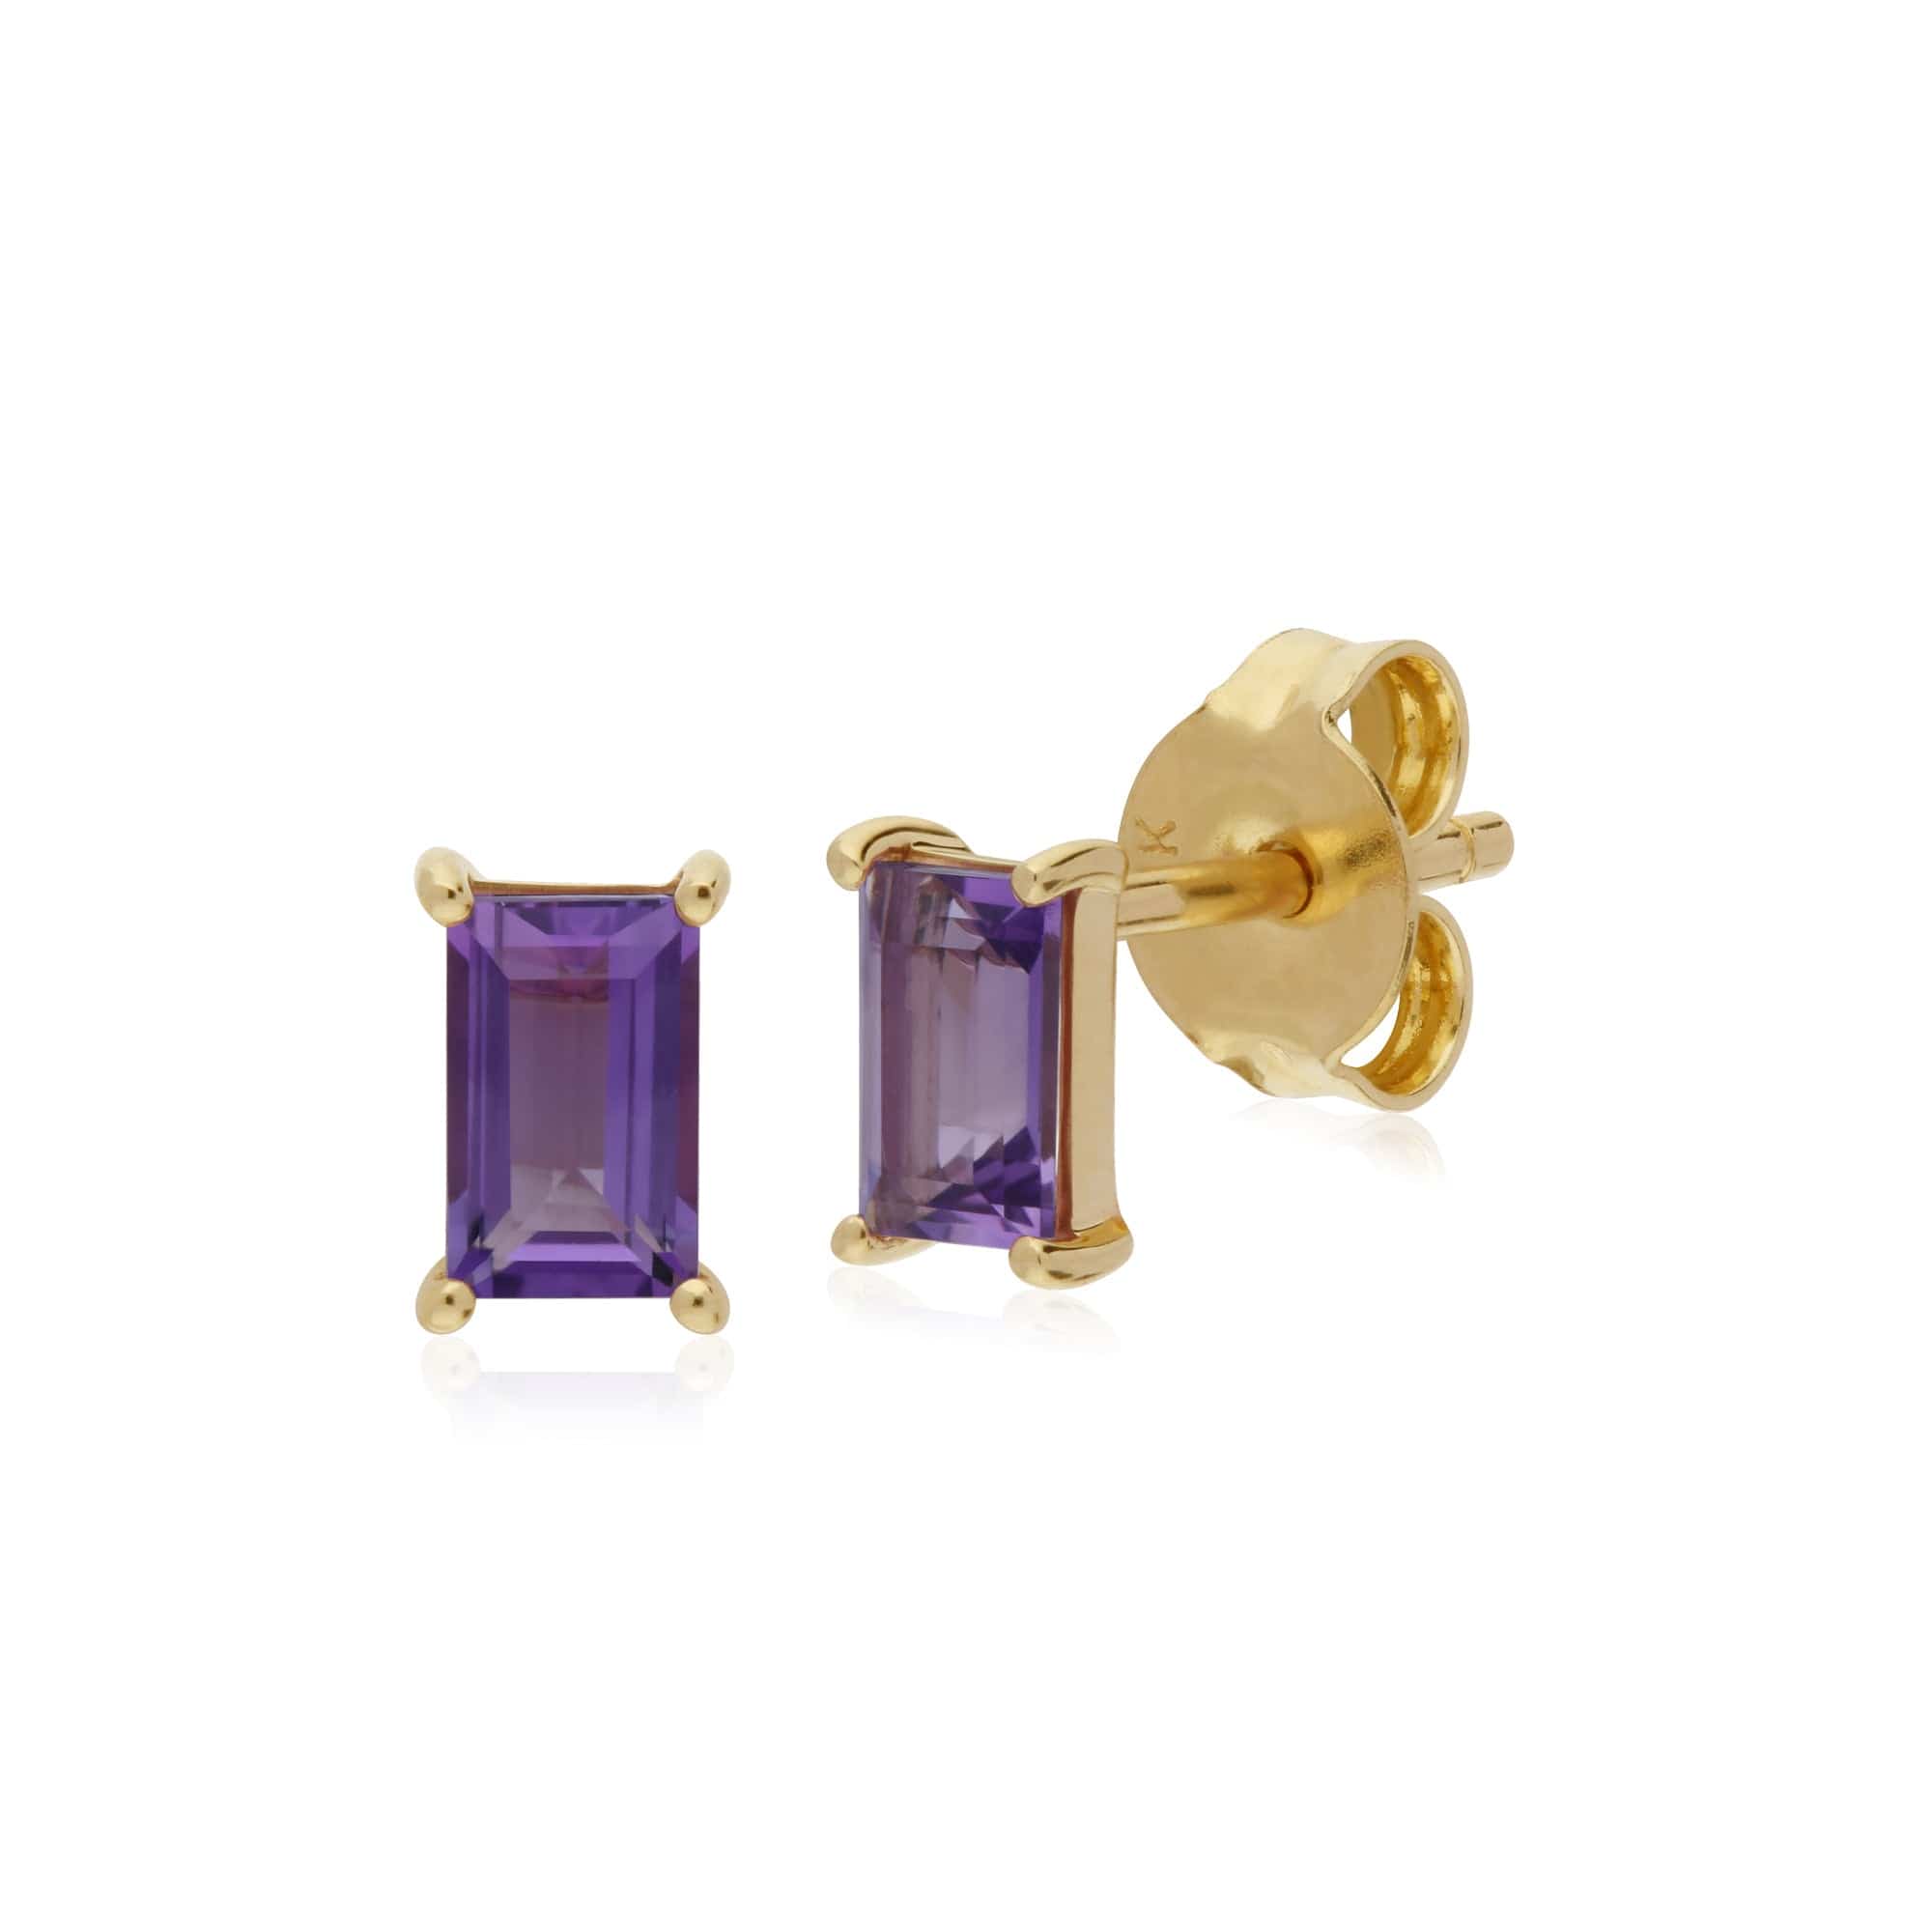 135E1524019-135P1872019 Classic Round Amethyst Single Stone Baguette Stud Earrings & Necklace Set in 9ct Yellow Gold 2